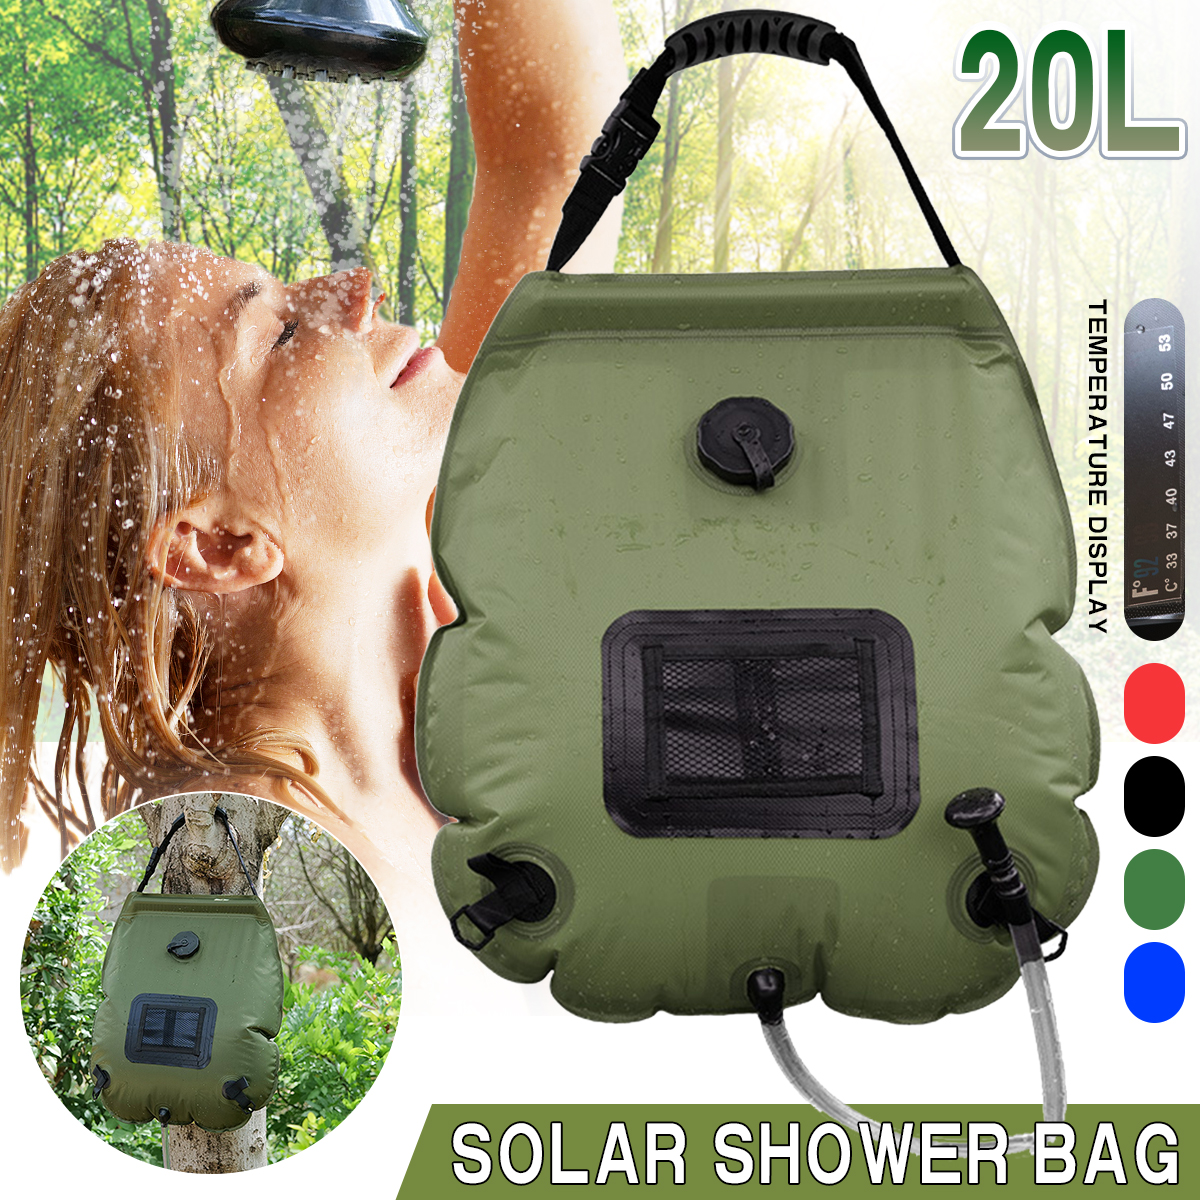 20L-Portable-Solar-Heated-Shower-Water-Bathing-Bag-Outdoor-Camping-Hiking-Water-Bag-With-Temperature-1790788-1